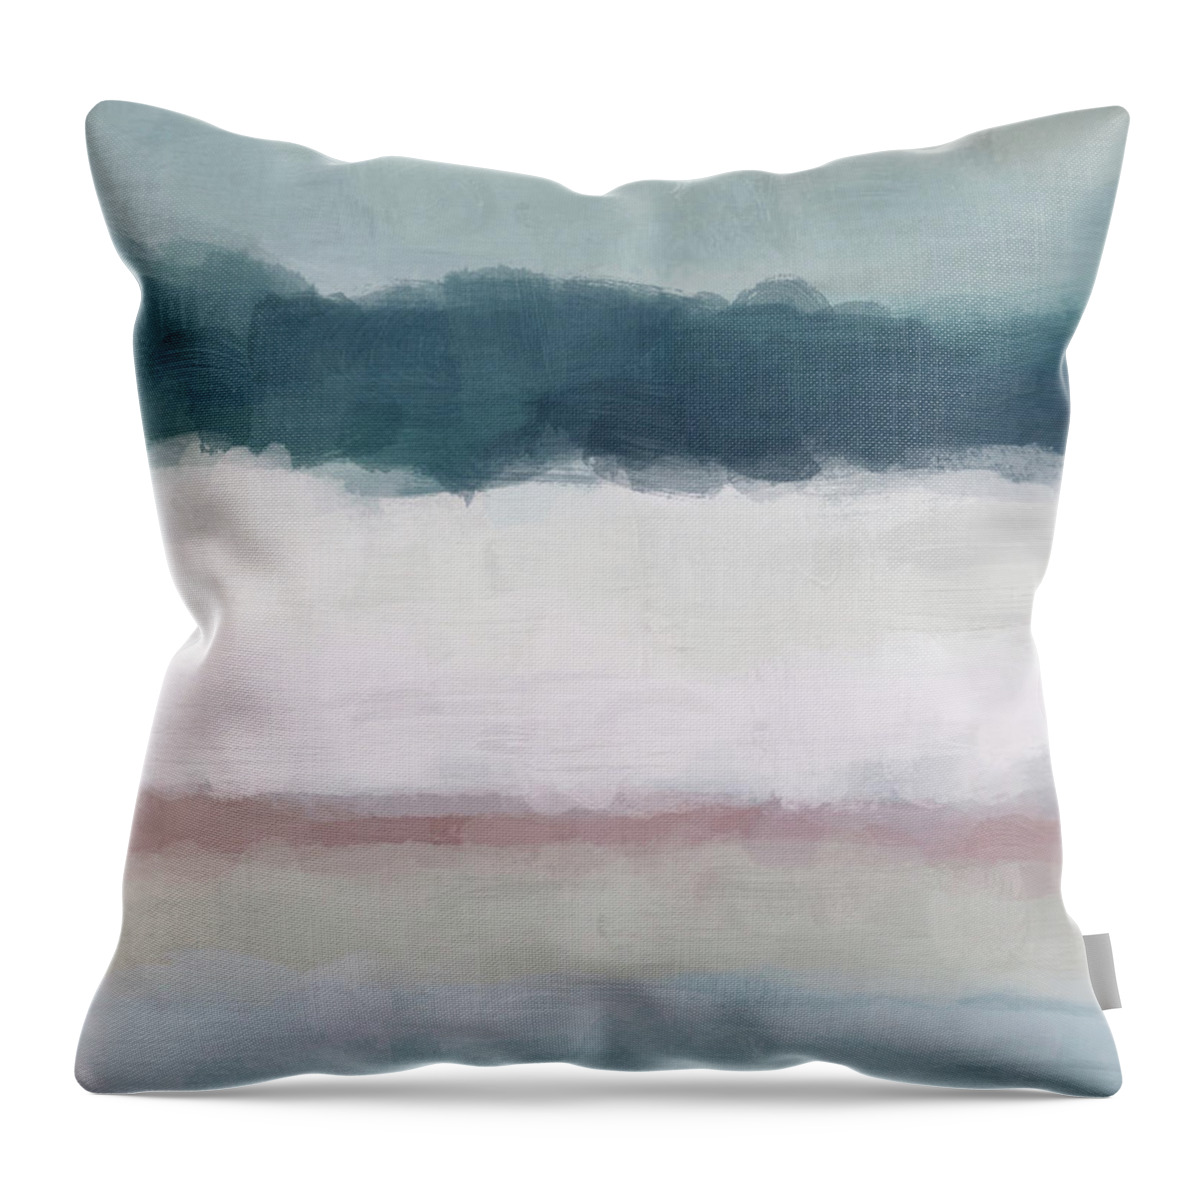 Dark Teal Throw Pillow featuring the painting Lullaby Waves II by Rachel Elise